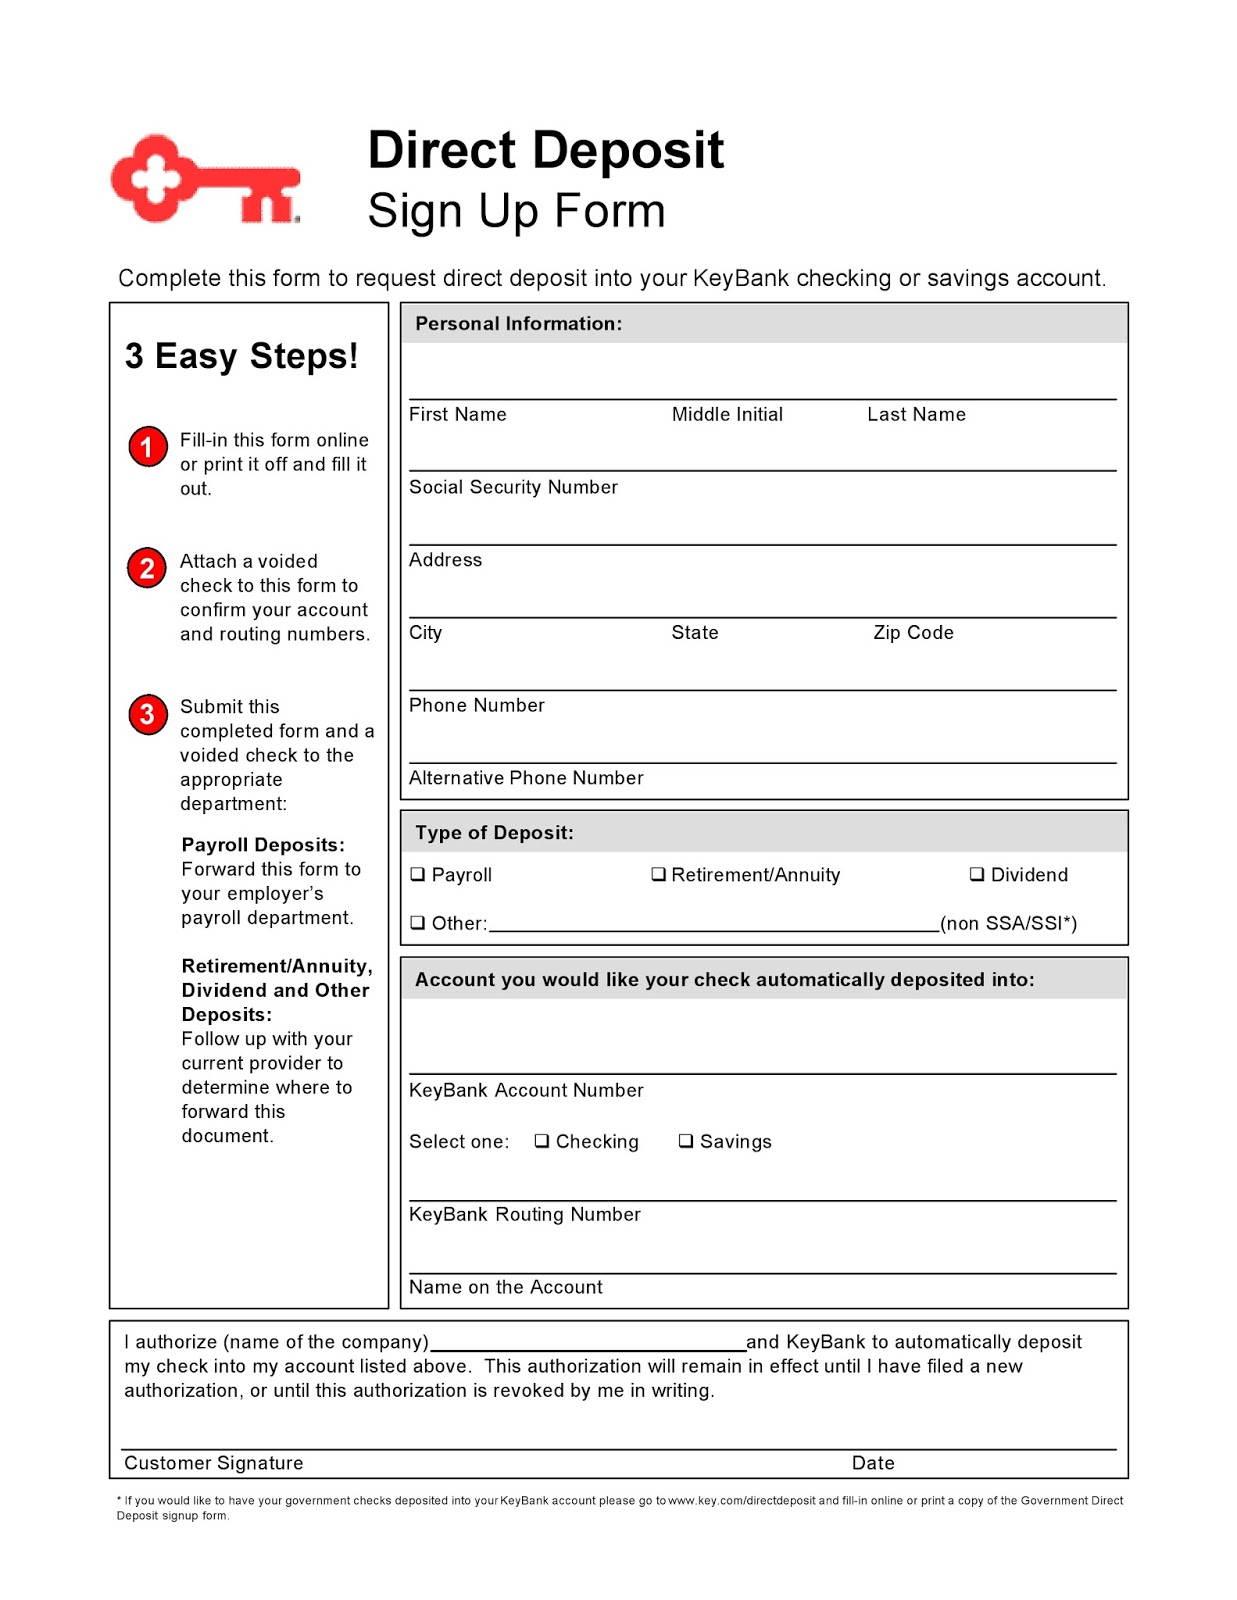 Direct Deposit Form Template Free